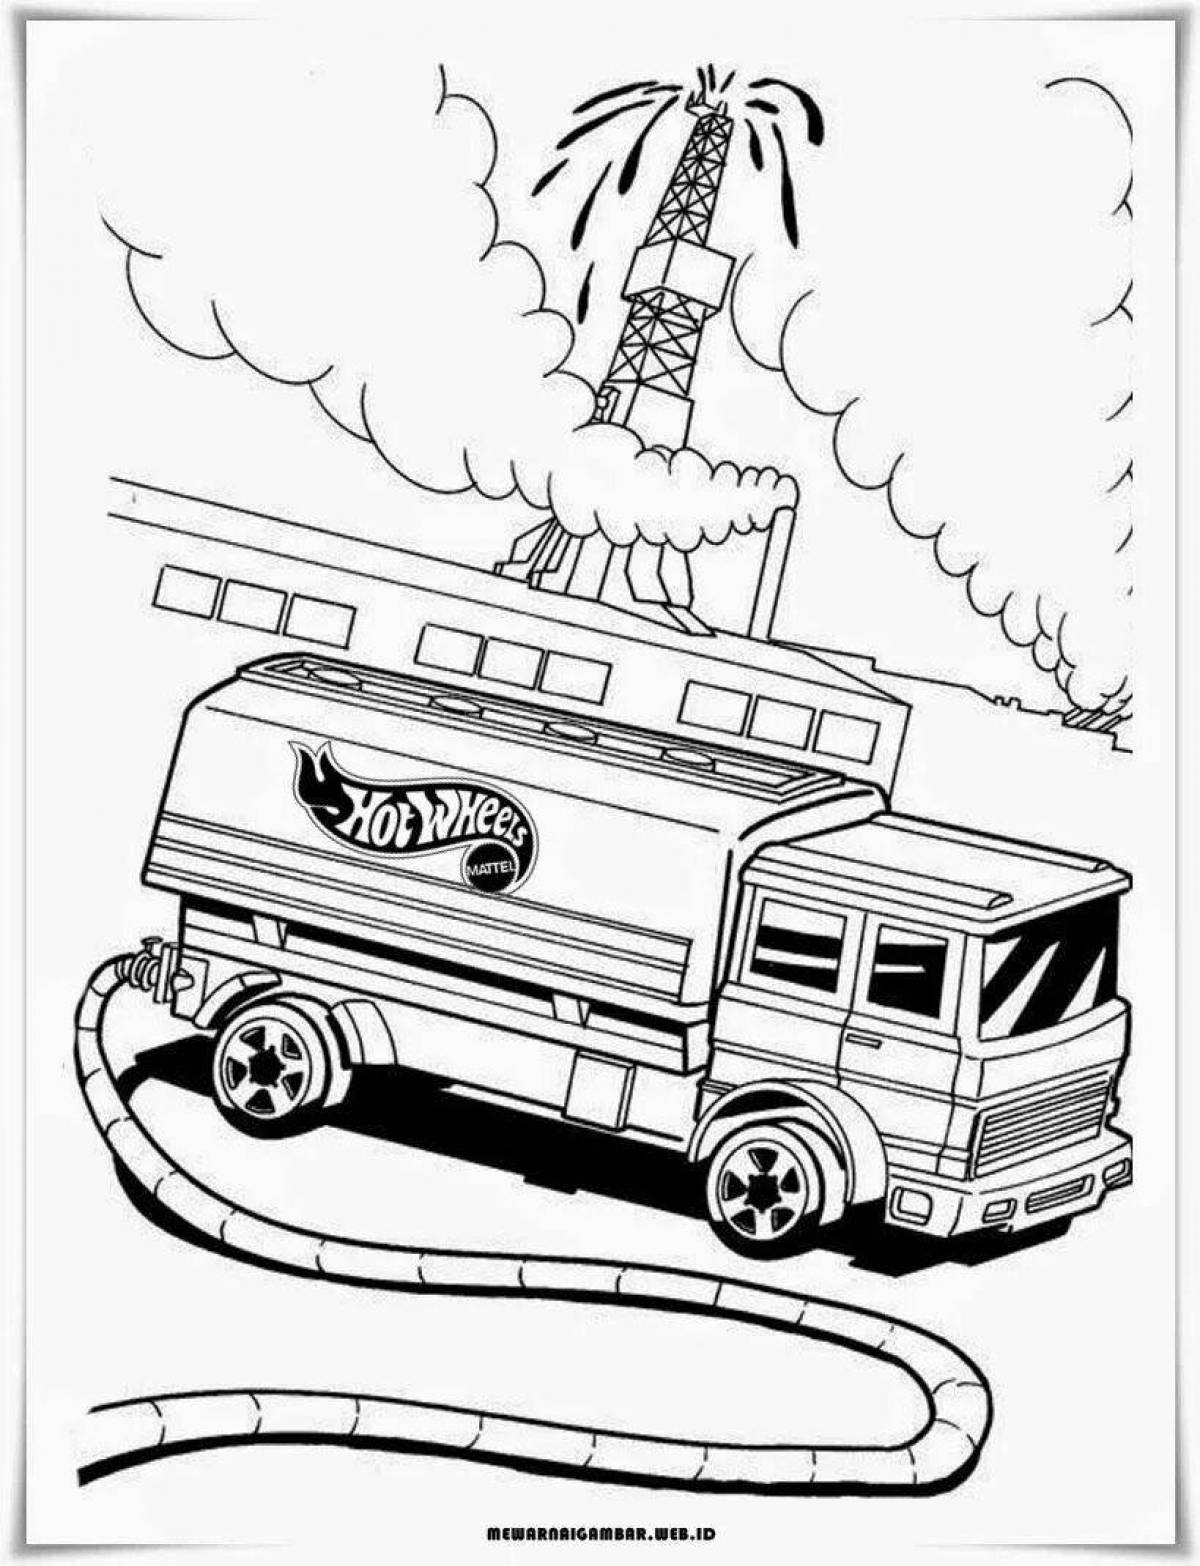 Radiant sewer car coloring page